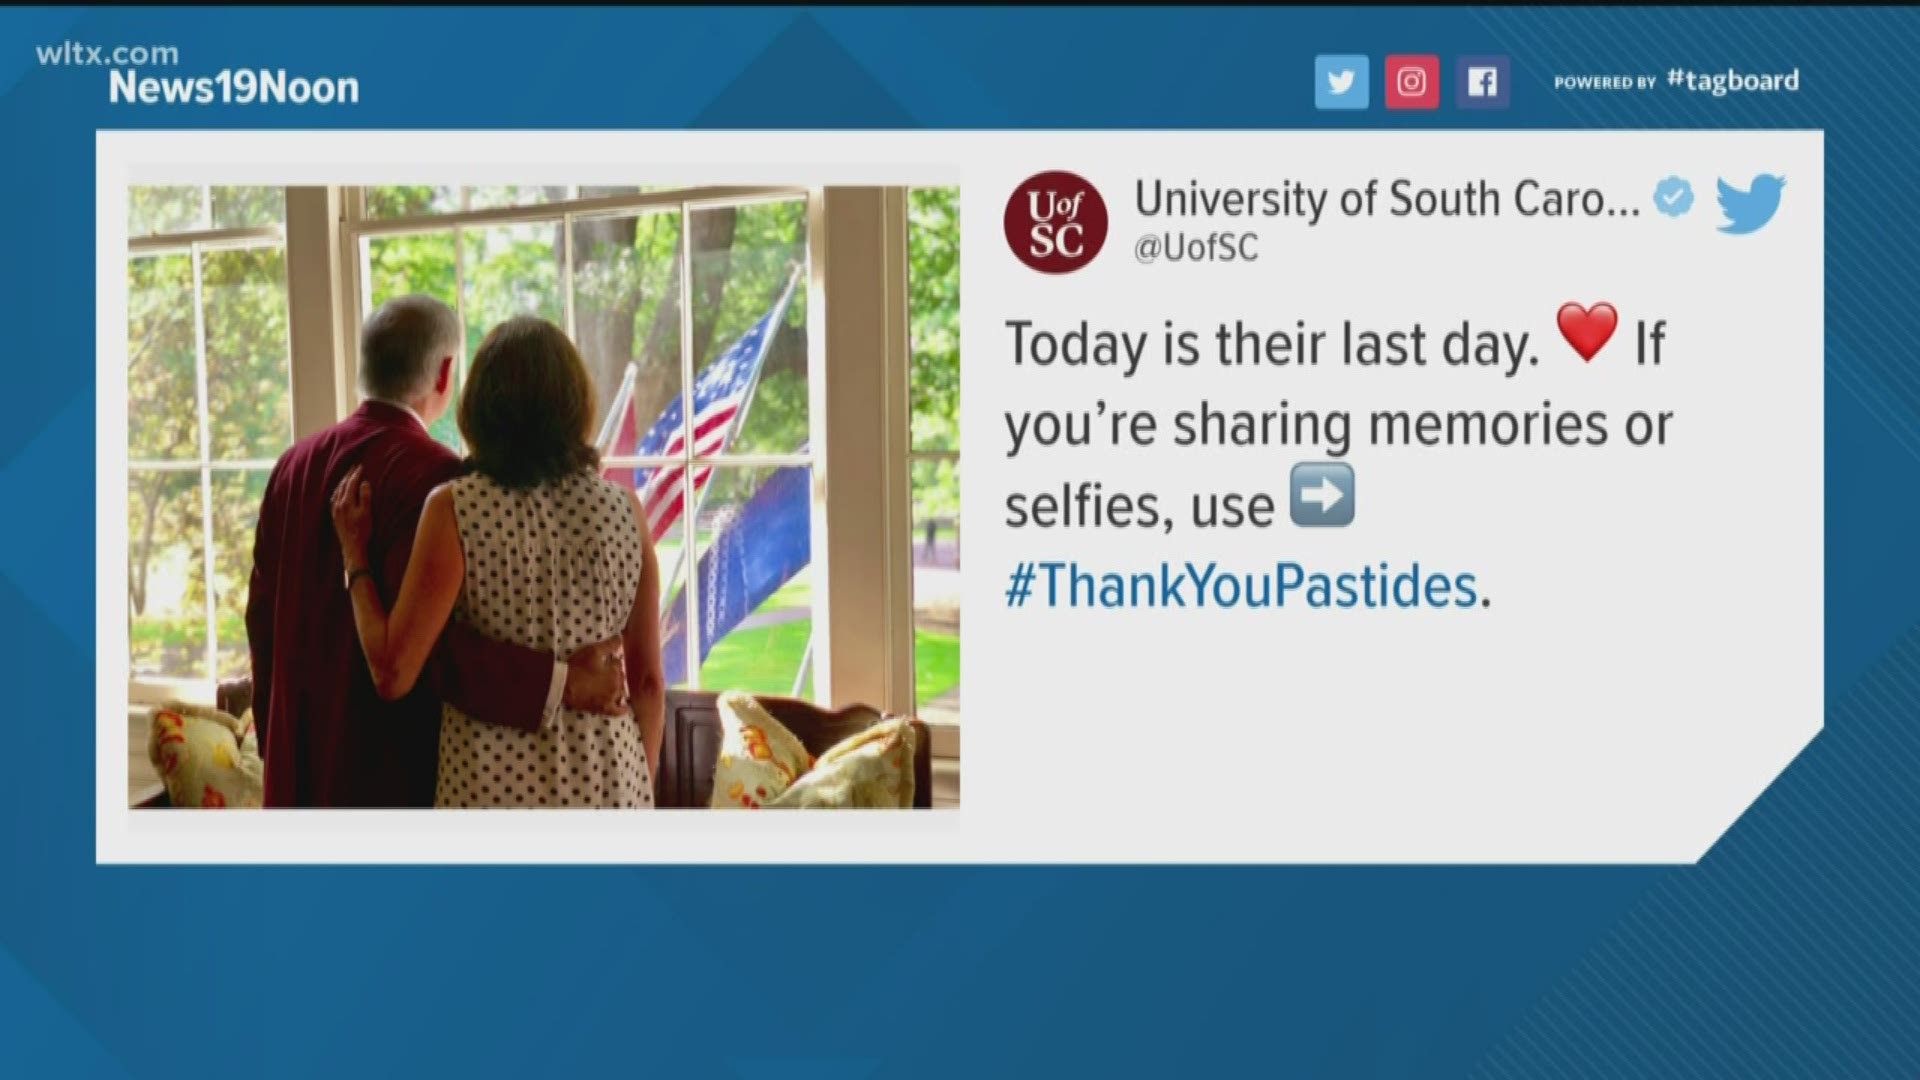 The University of South Carolina is saying a final farewell to longtime president Dr. Harris Pastides.